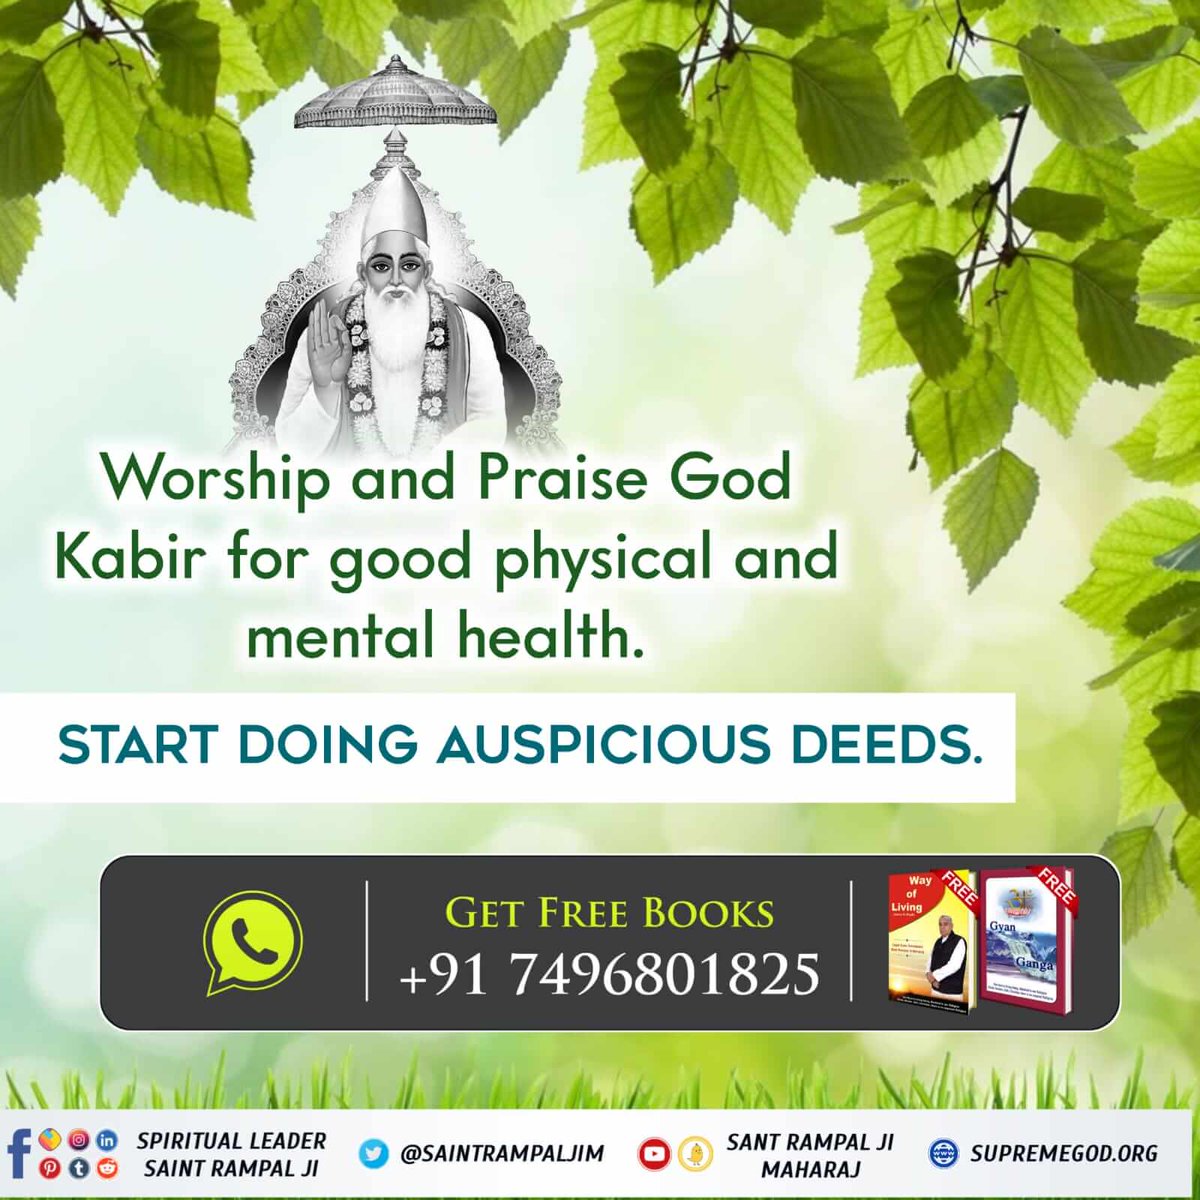 #GodMorningThursday Supreme God Kabir is the giver of complete happiness and the enemy of sins. He is the giver of supreme peace.